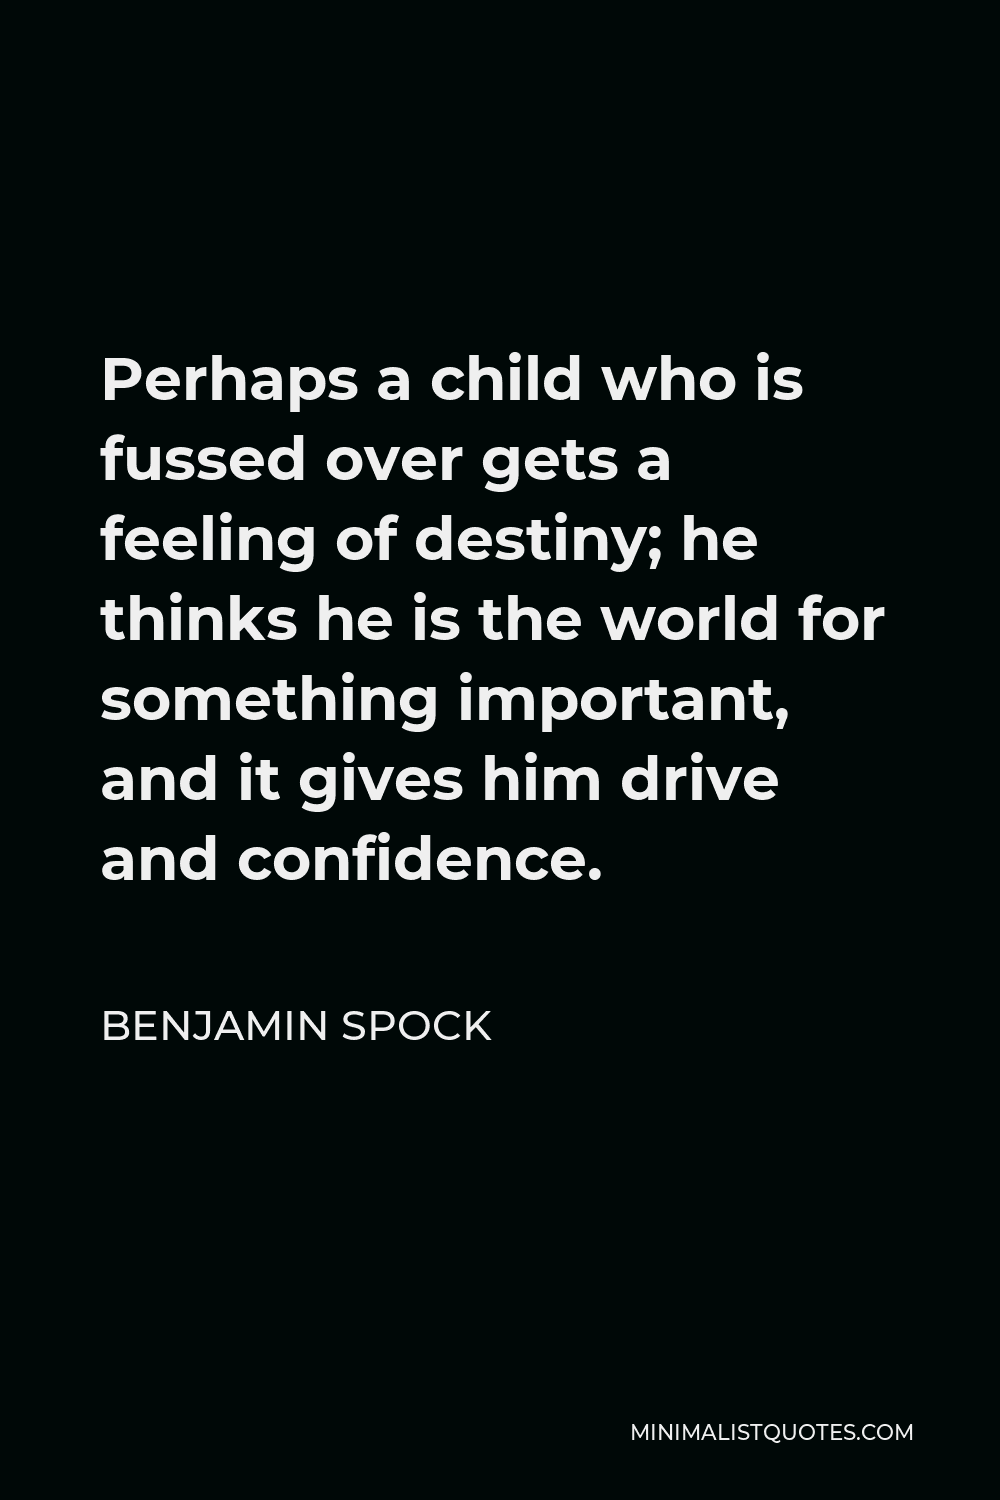 Benjamin Spock Quote - Perhaps a child who is fussed over gets a feeling of destiny; he thinks he is the world for something important, and it gives him drive and confidence.